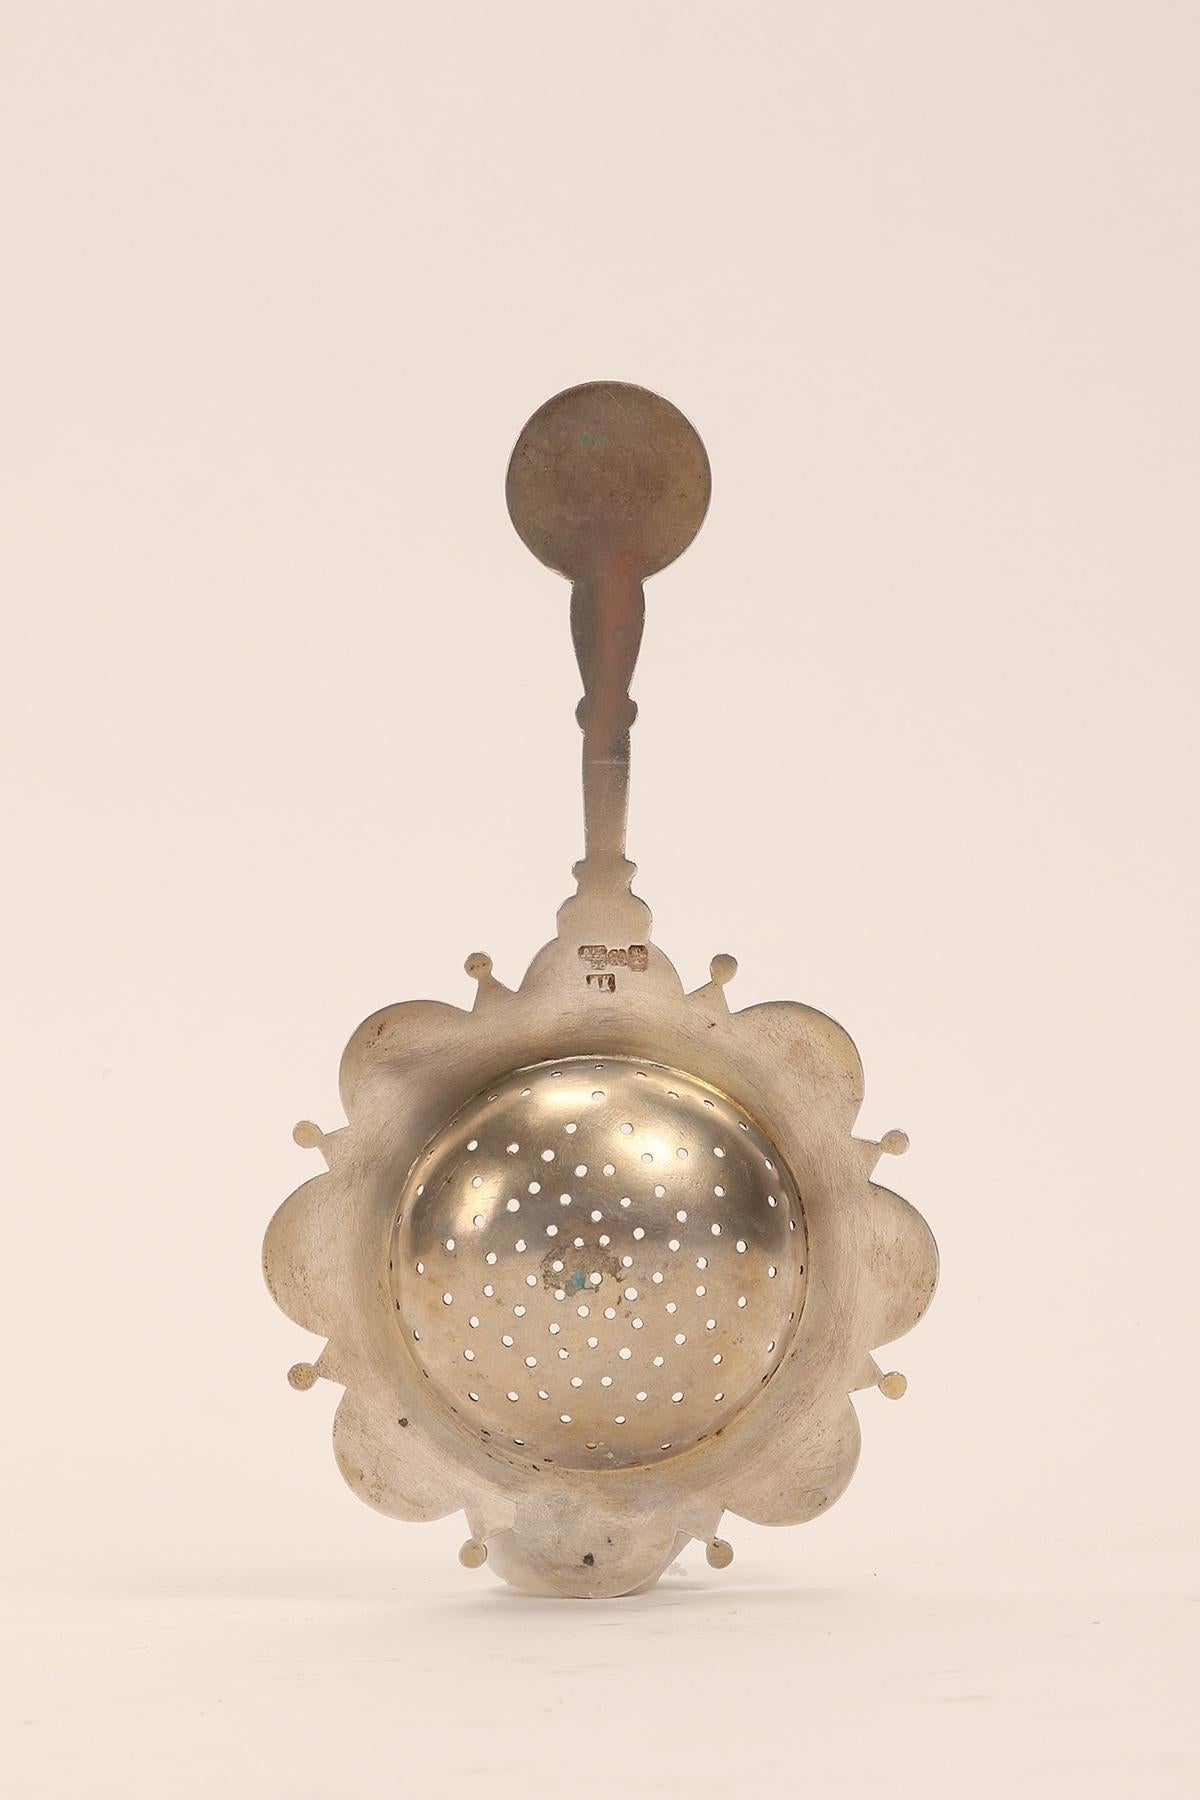 Silver and Enamels Tea Strainer, Moscow, 1896 For Sale 1